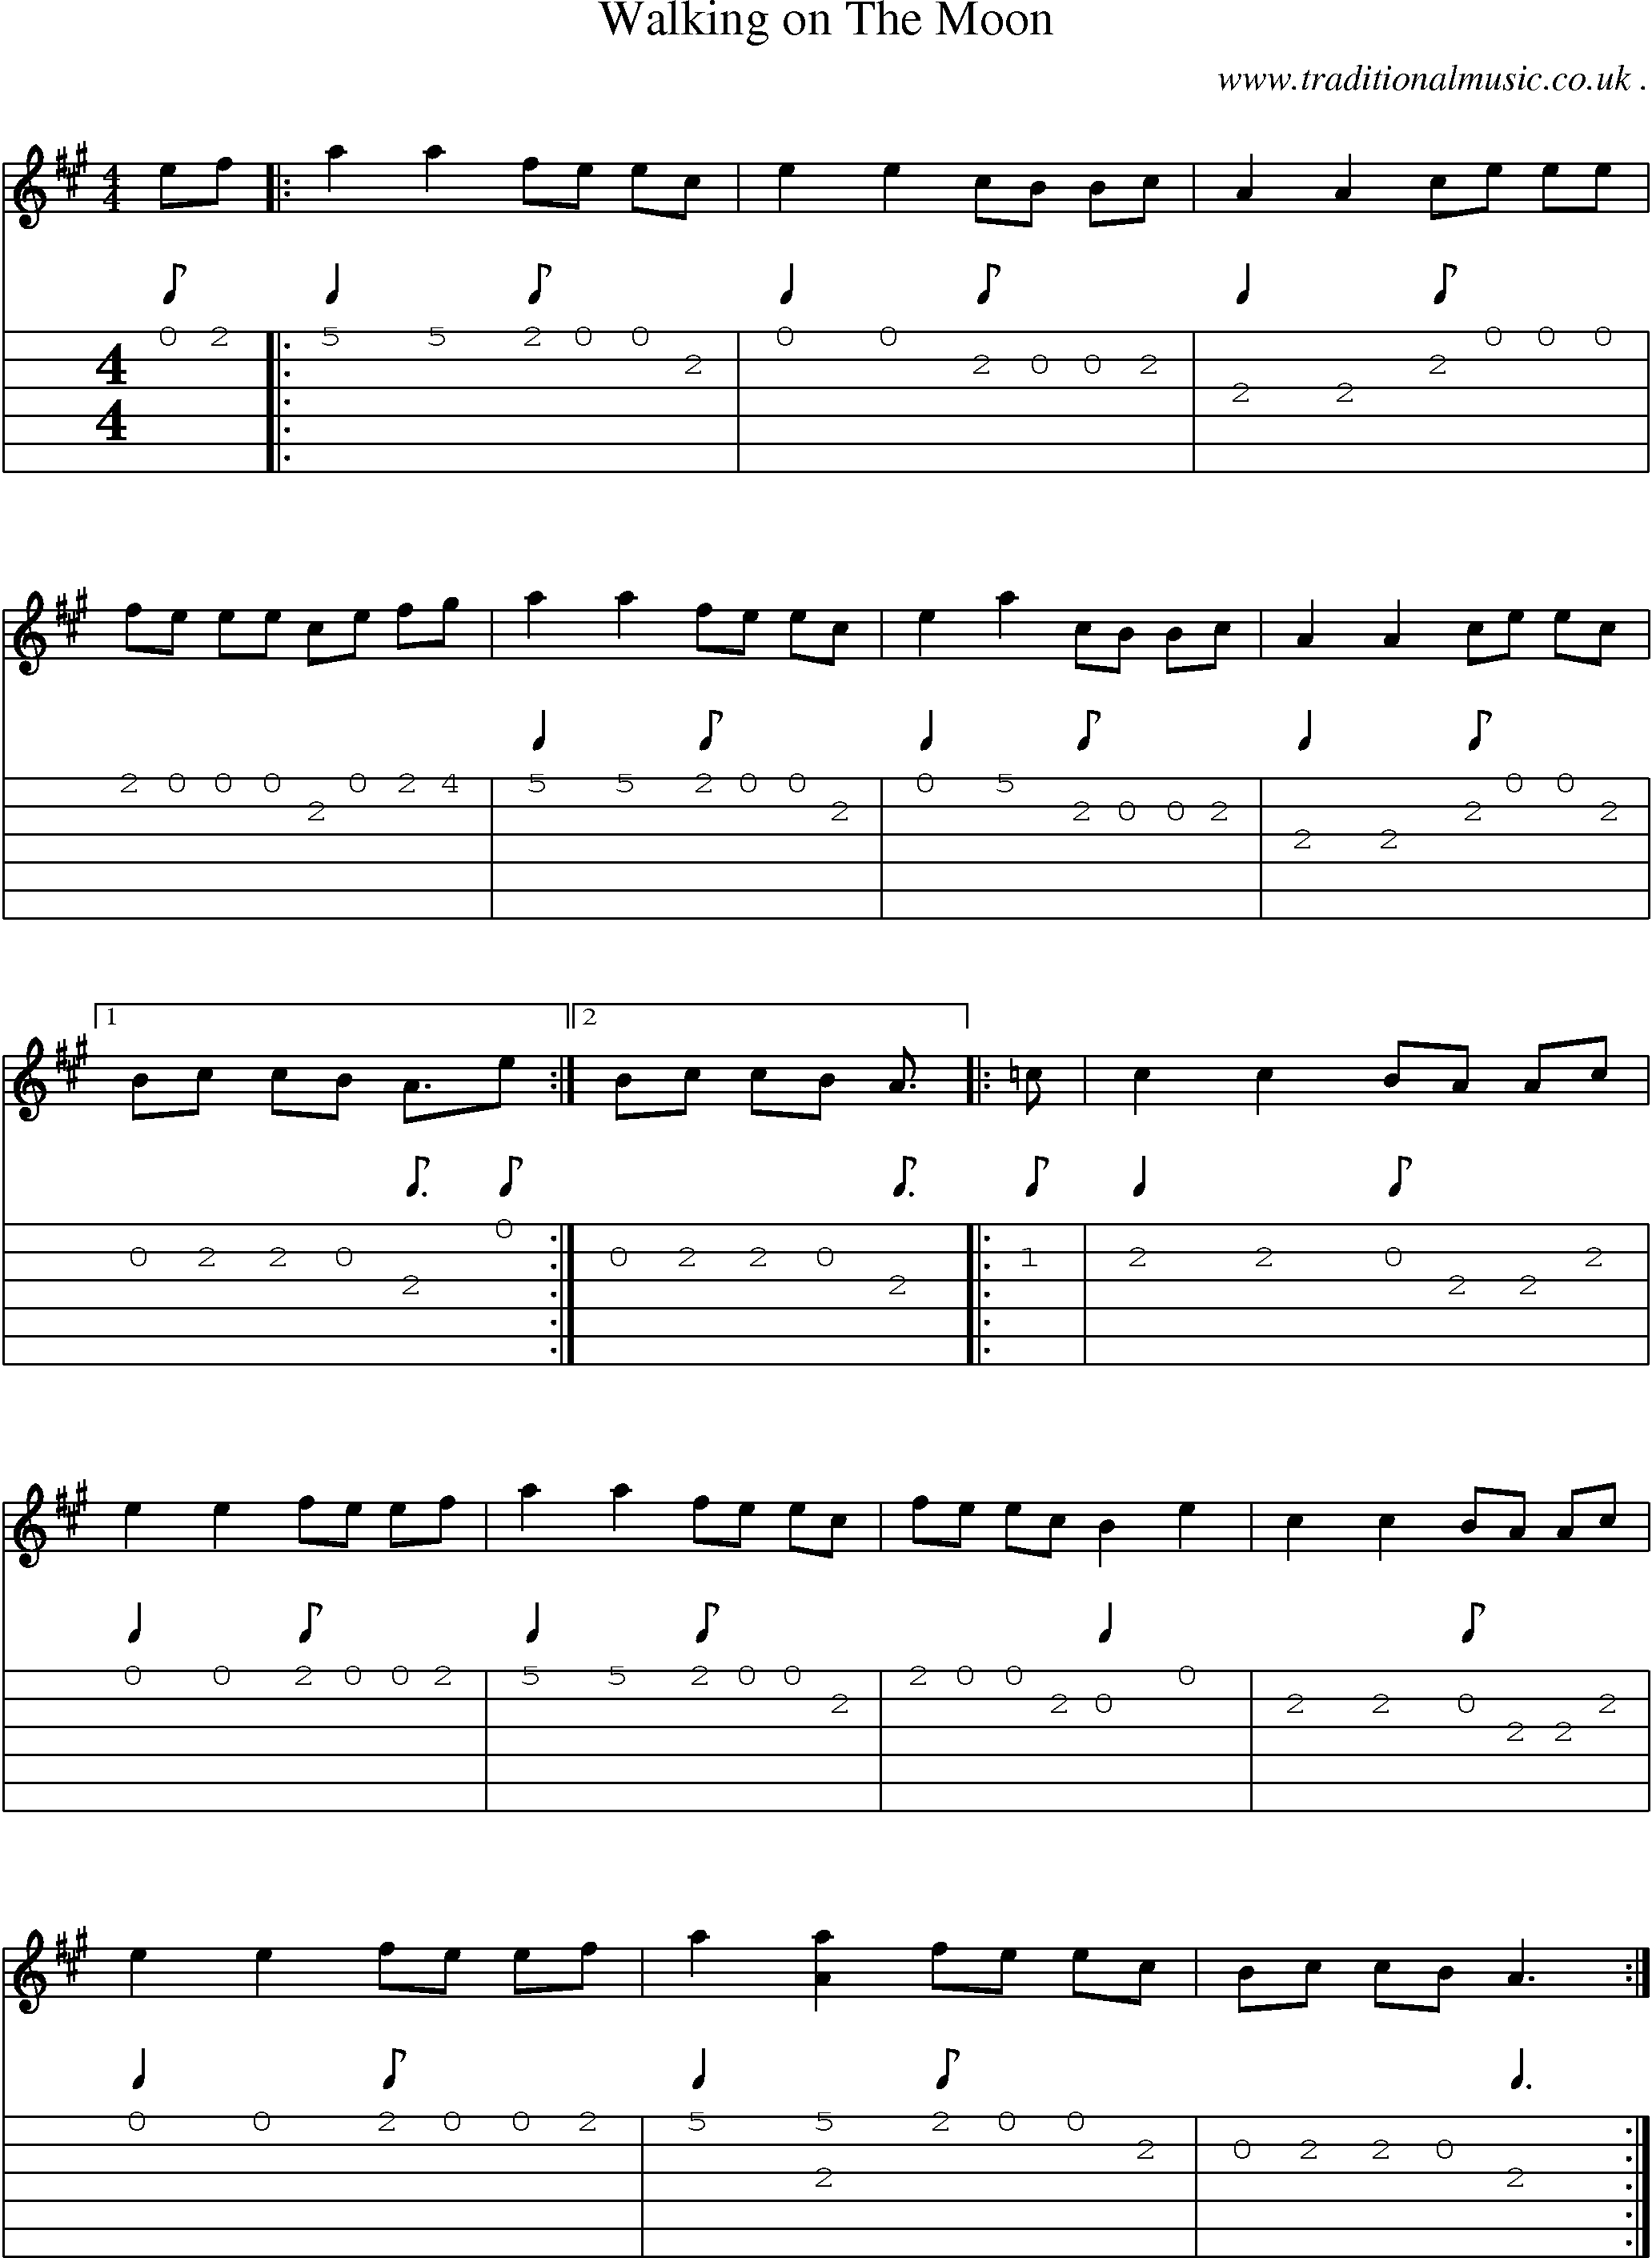 Sheet-music  score, Chords and Guitar Tabs for Walking On The Moon